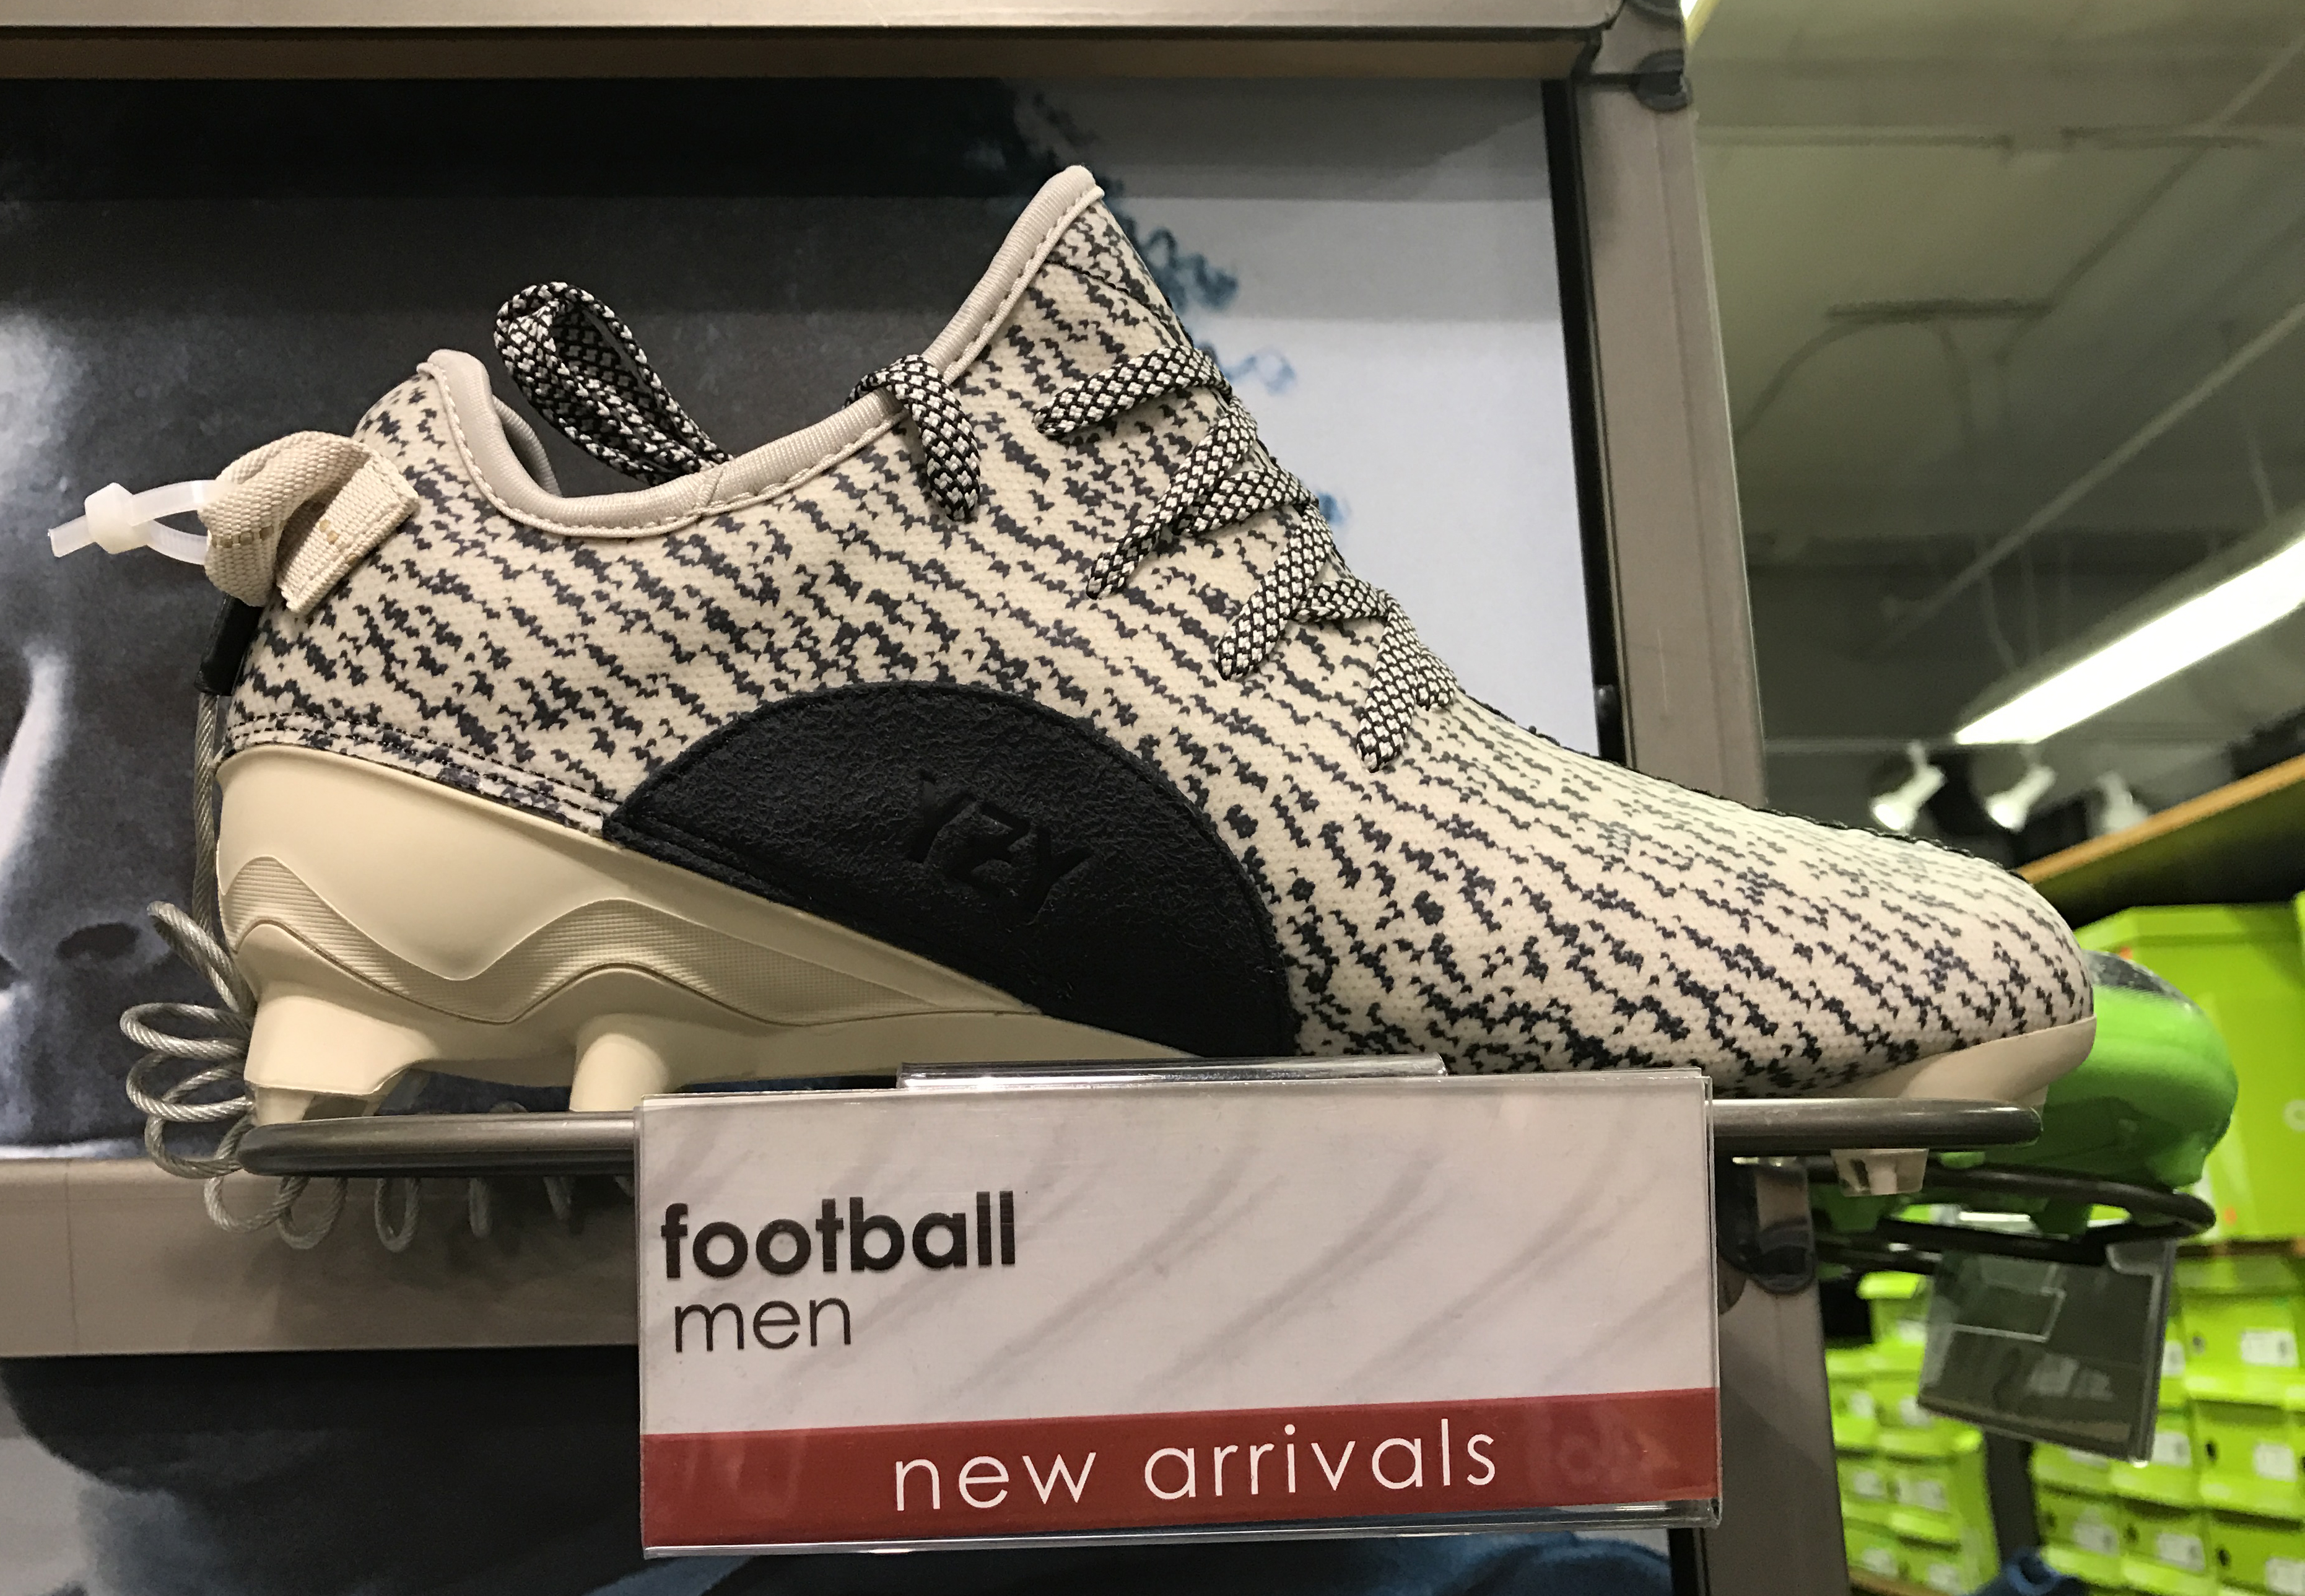 Adidas Yeezy Cleat Outlet | Sole Collector